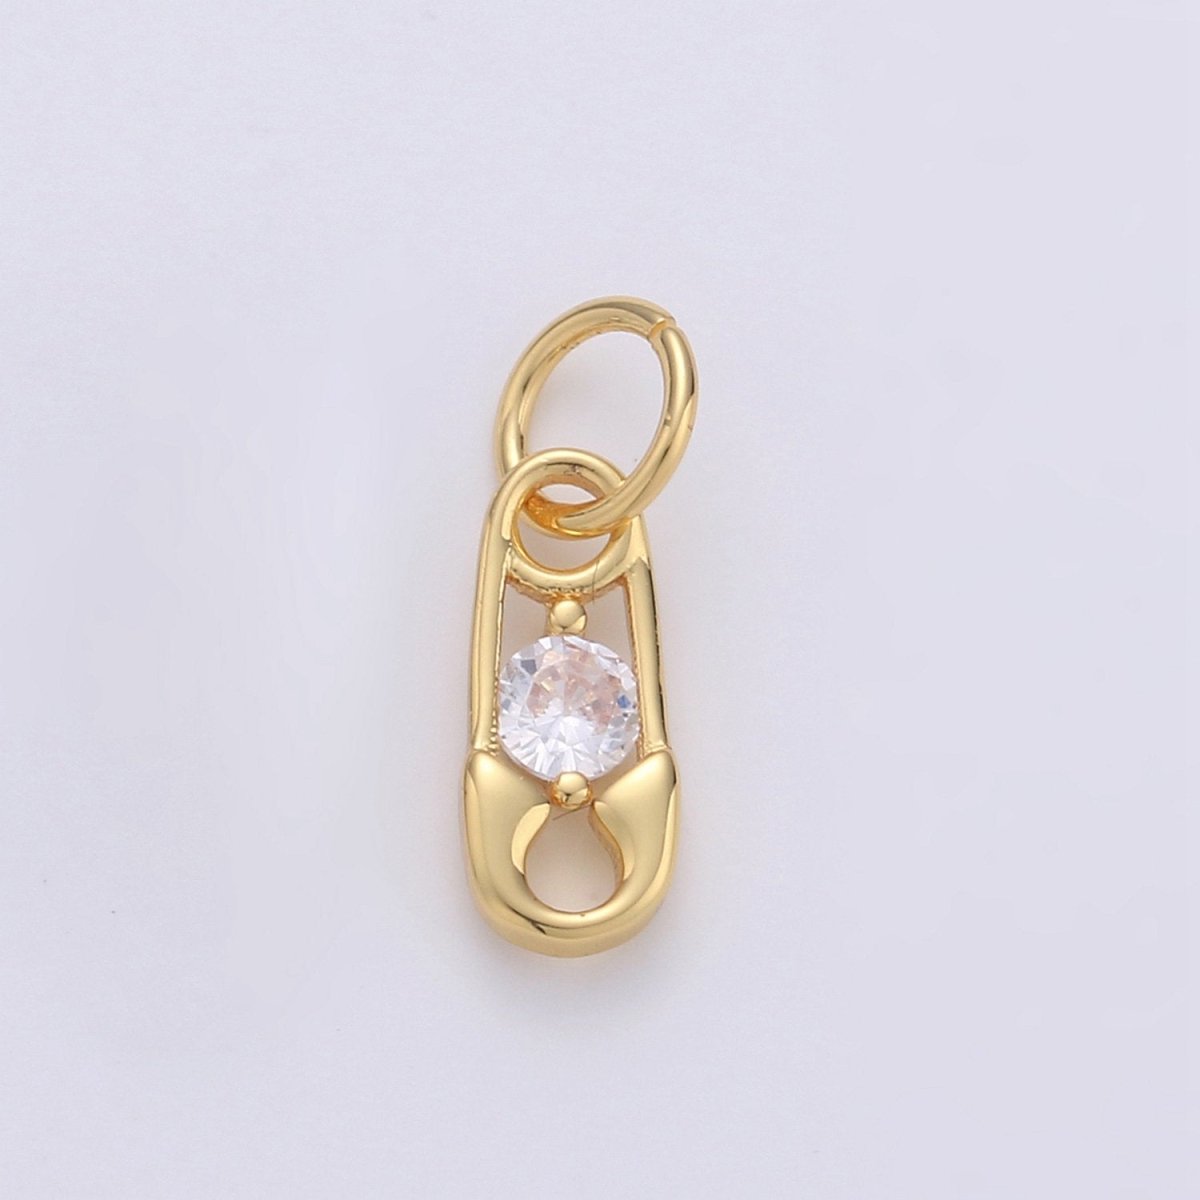 Mini Safety Pin Charm in 24K Gold Filled for Necklace Bracelet Earring Supply D-556 D-557 - DLUXCA